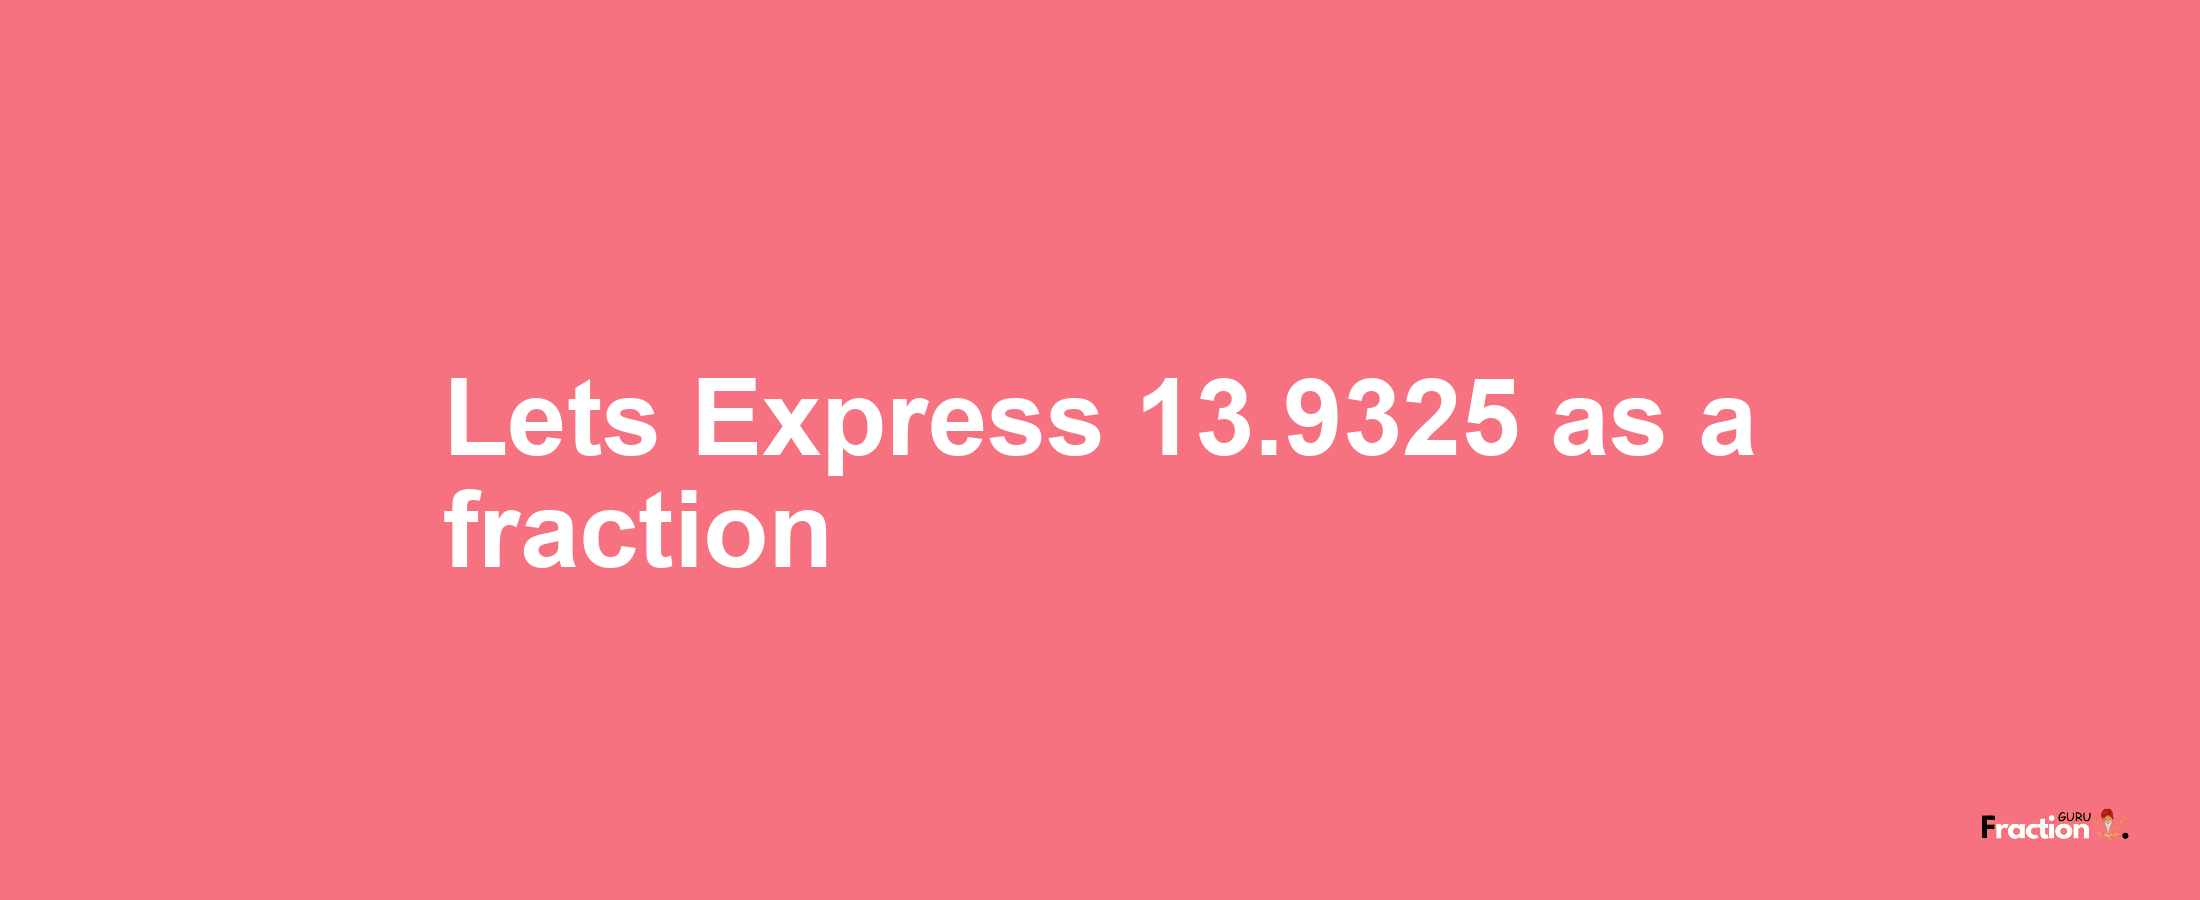 Lets Express 13.9325 as afraction